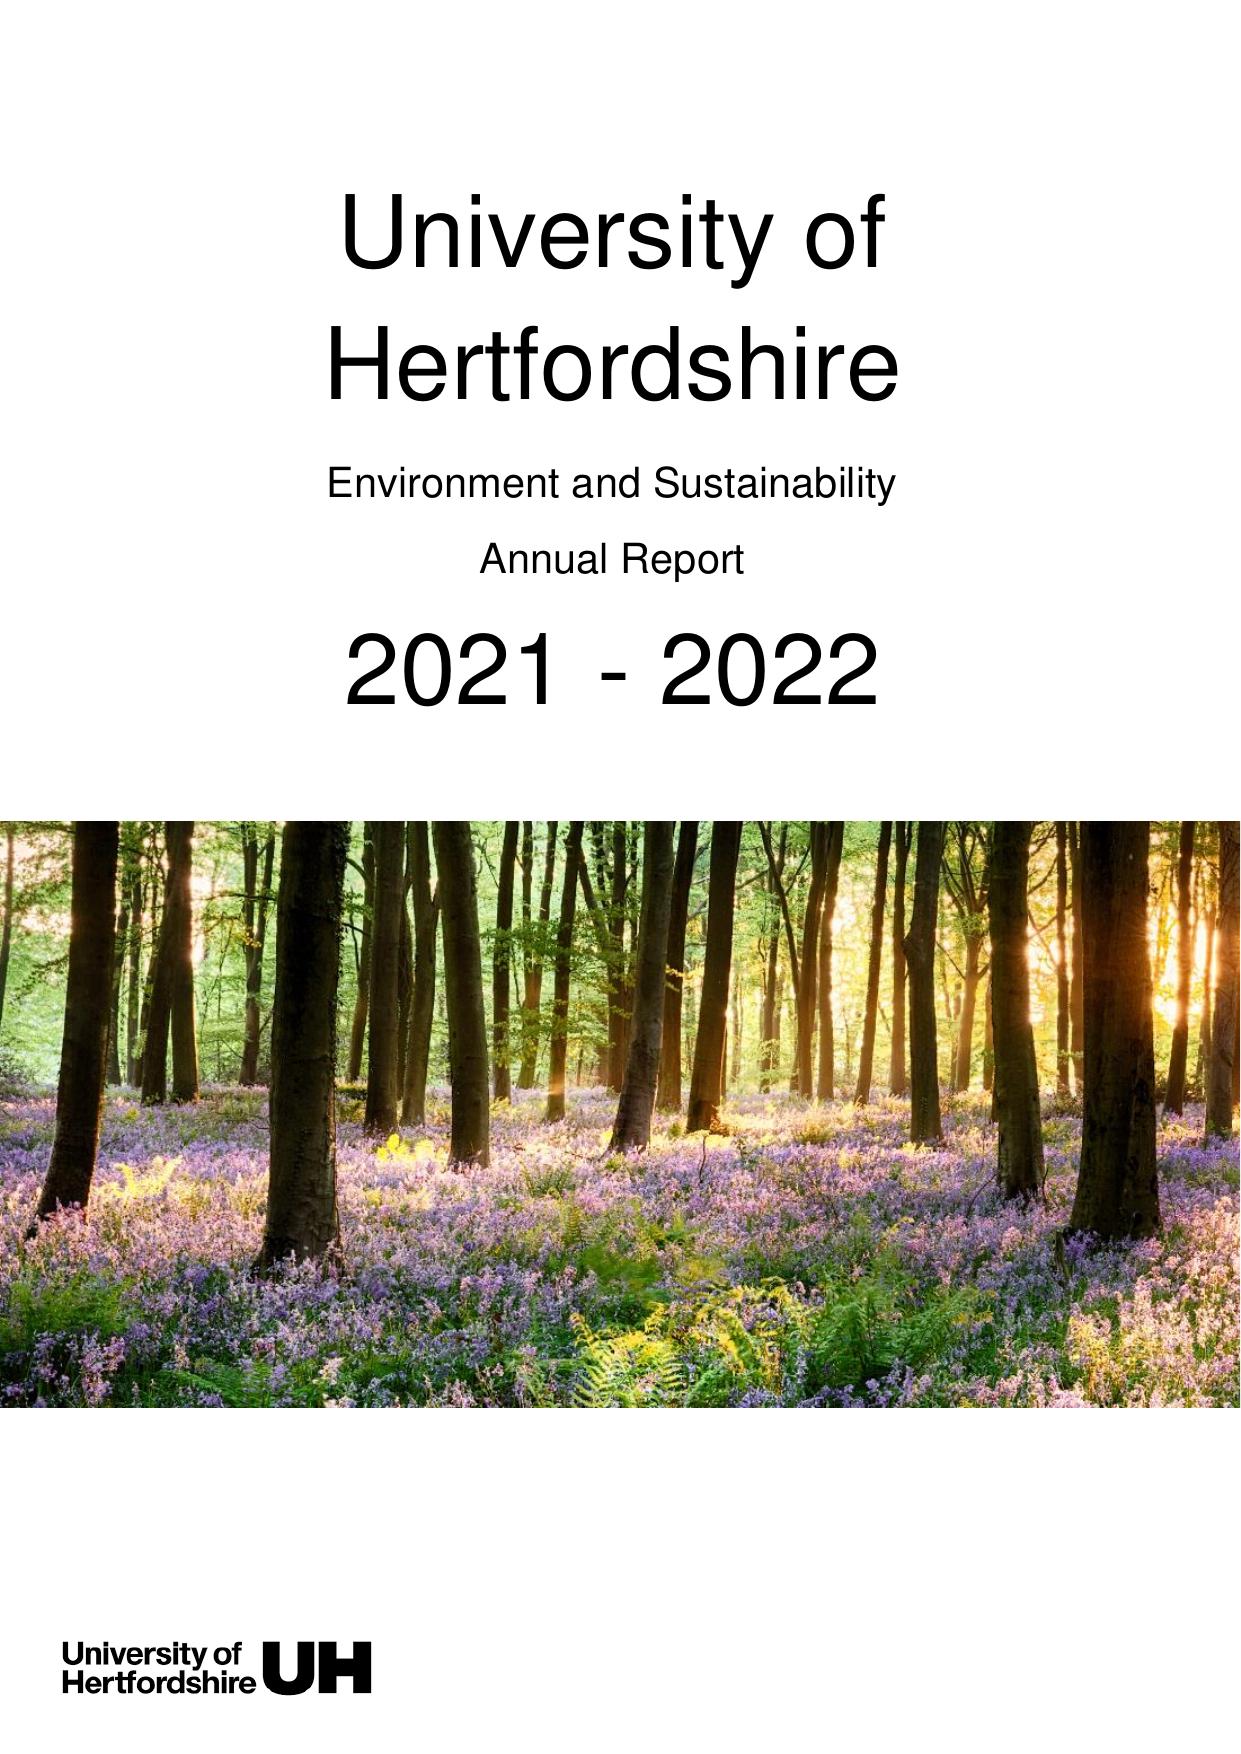 HERTS 2022 Annual Report